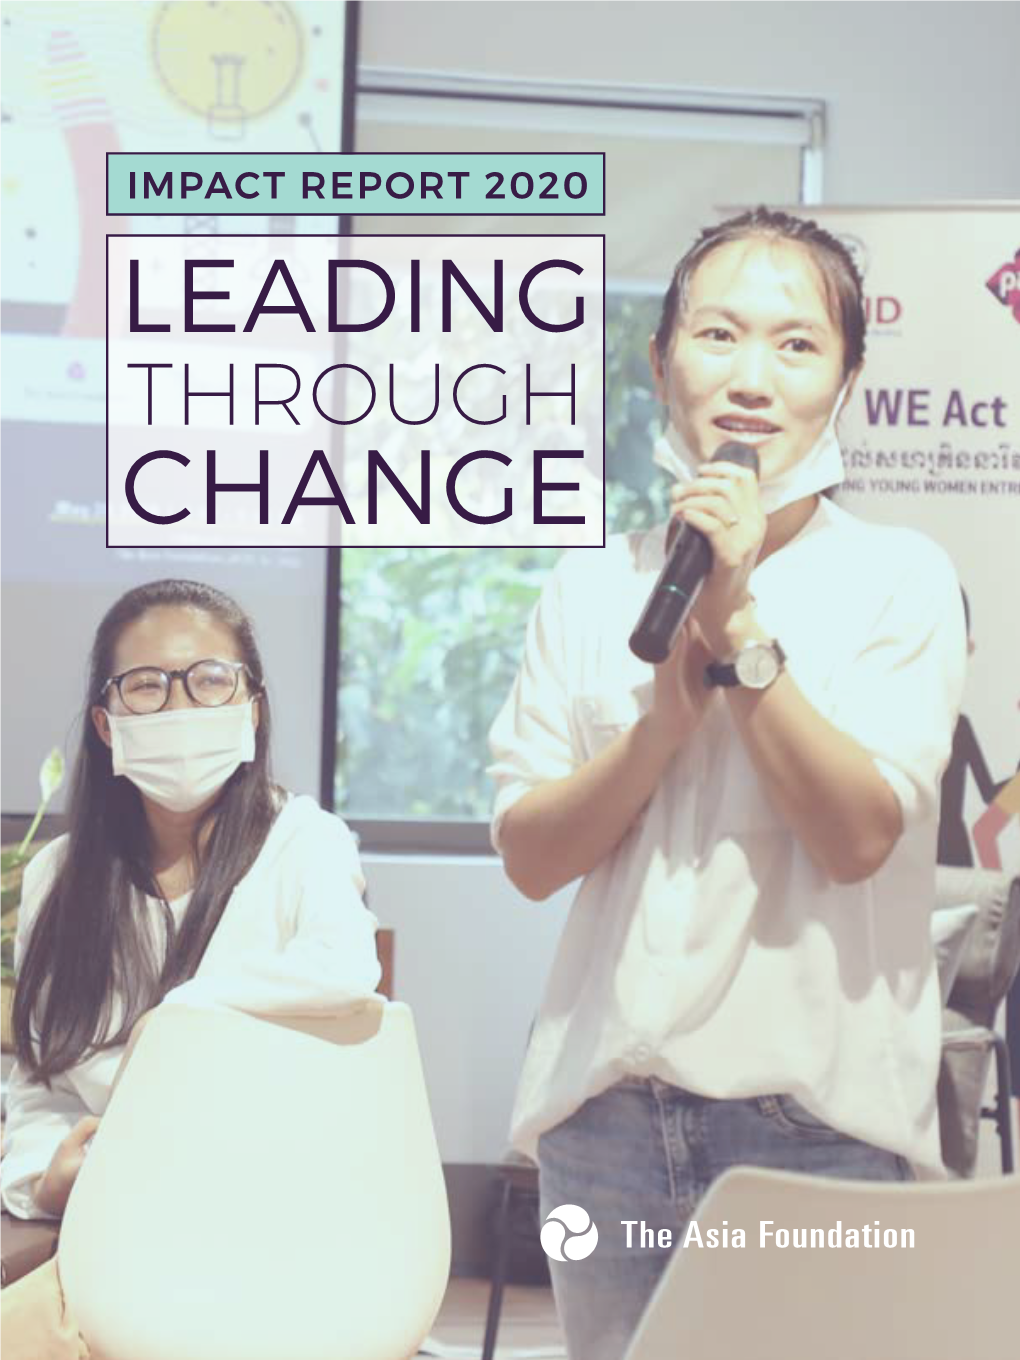 CHANGE COVER IMAGE: in Cambodia, the Asia Foundation Launched the First-Ever Women in TEK Network(WTN) to Fuel Women Run Start-Ups